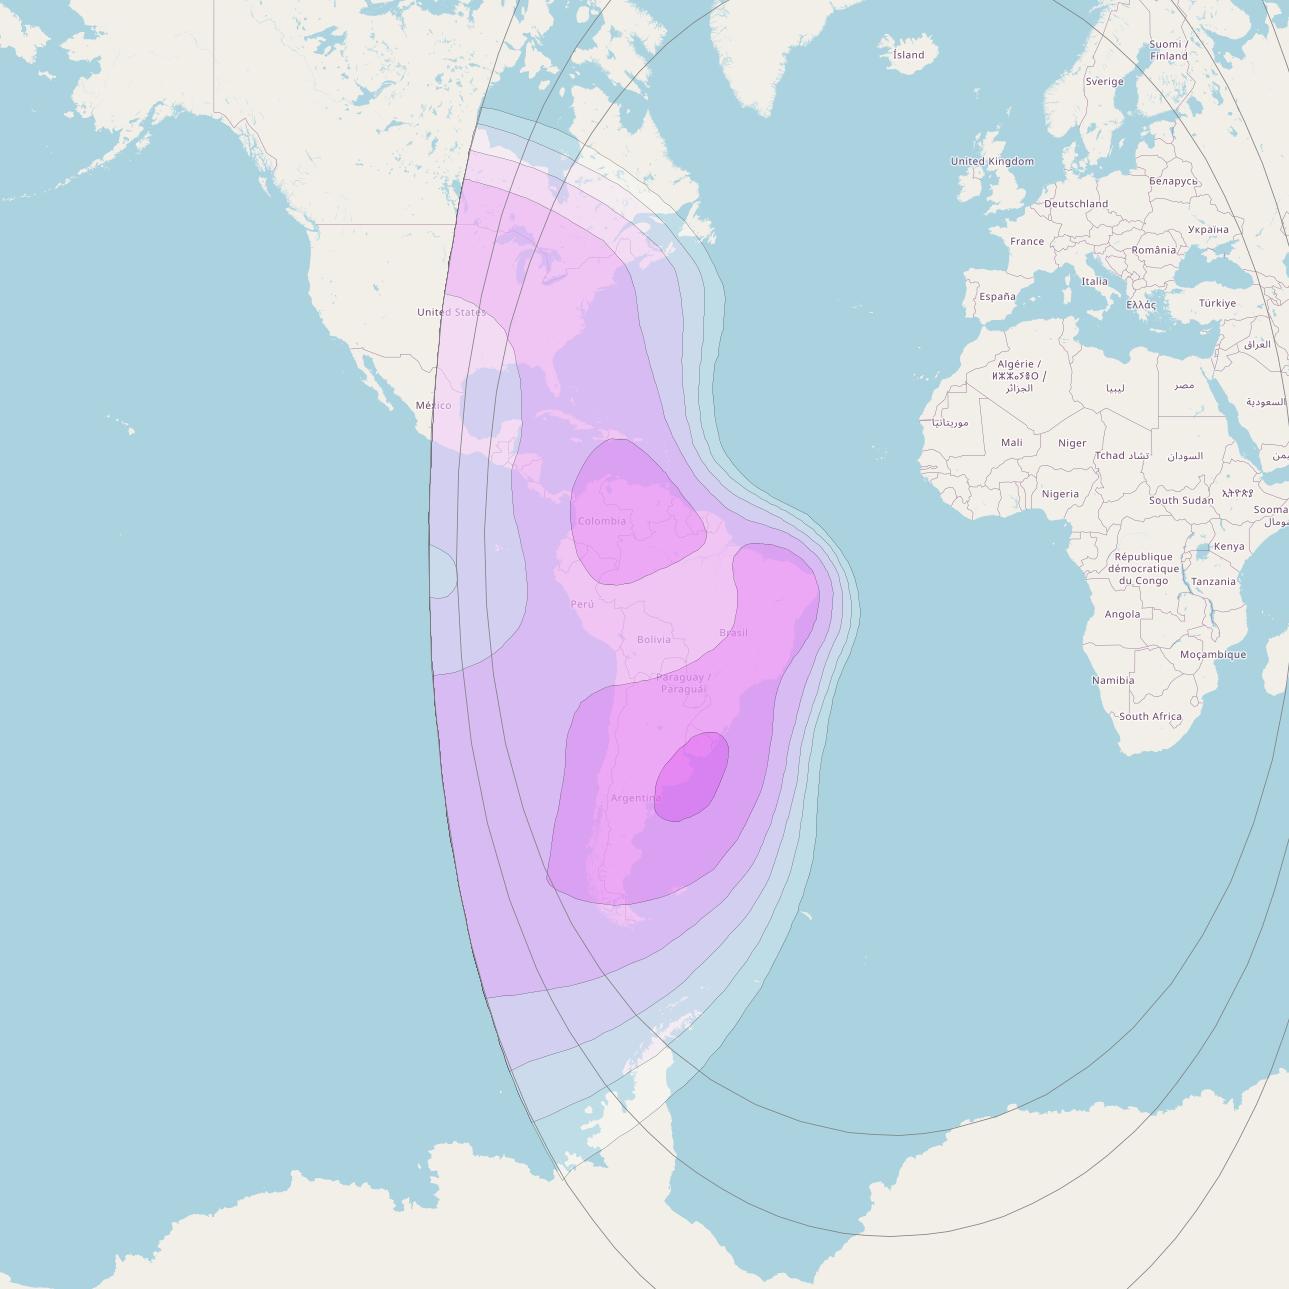 SES 4 at 22° W downlink C-band West Hemi Beam coverage map